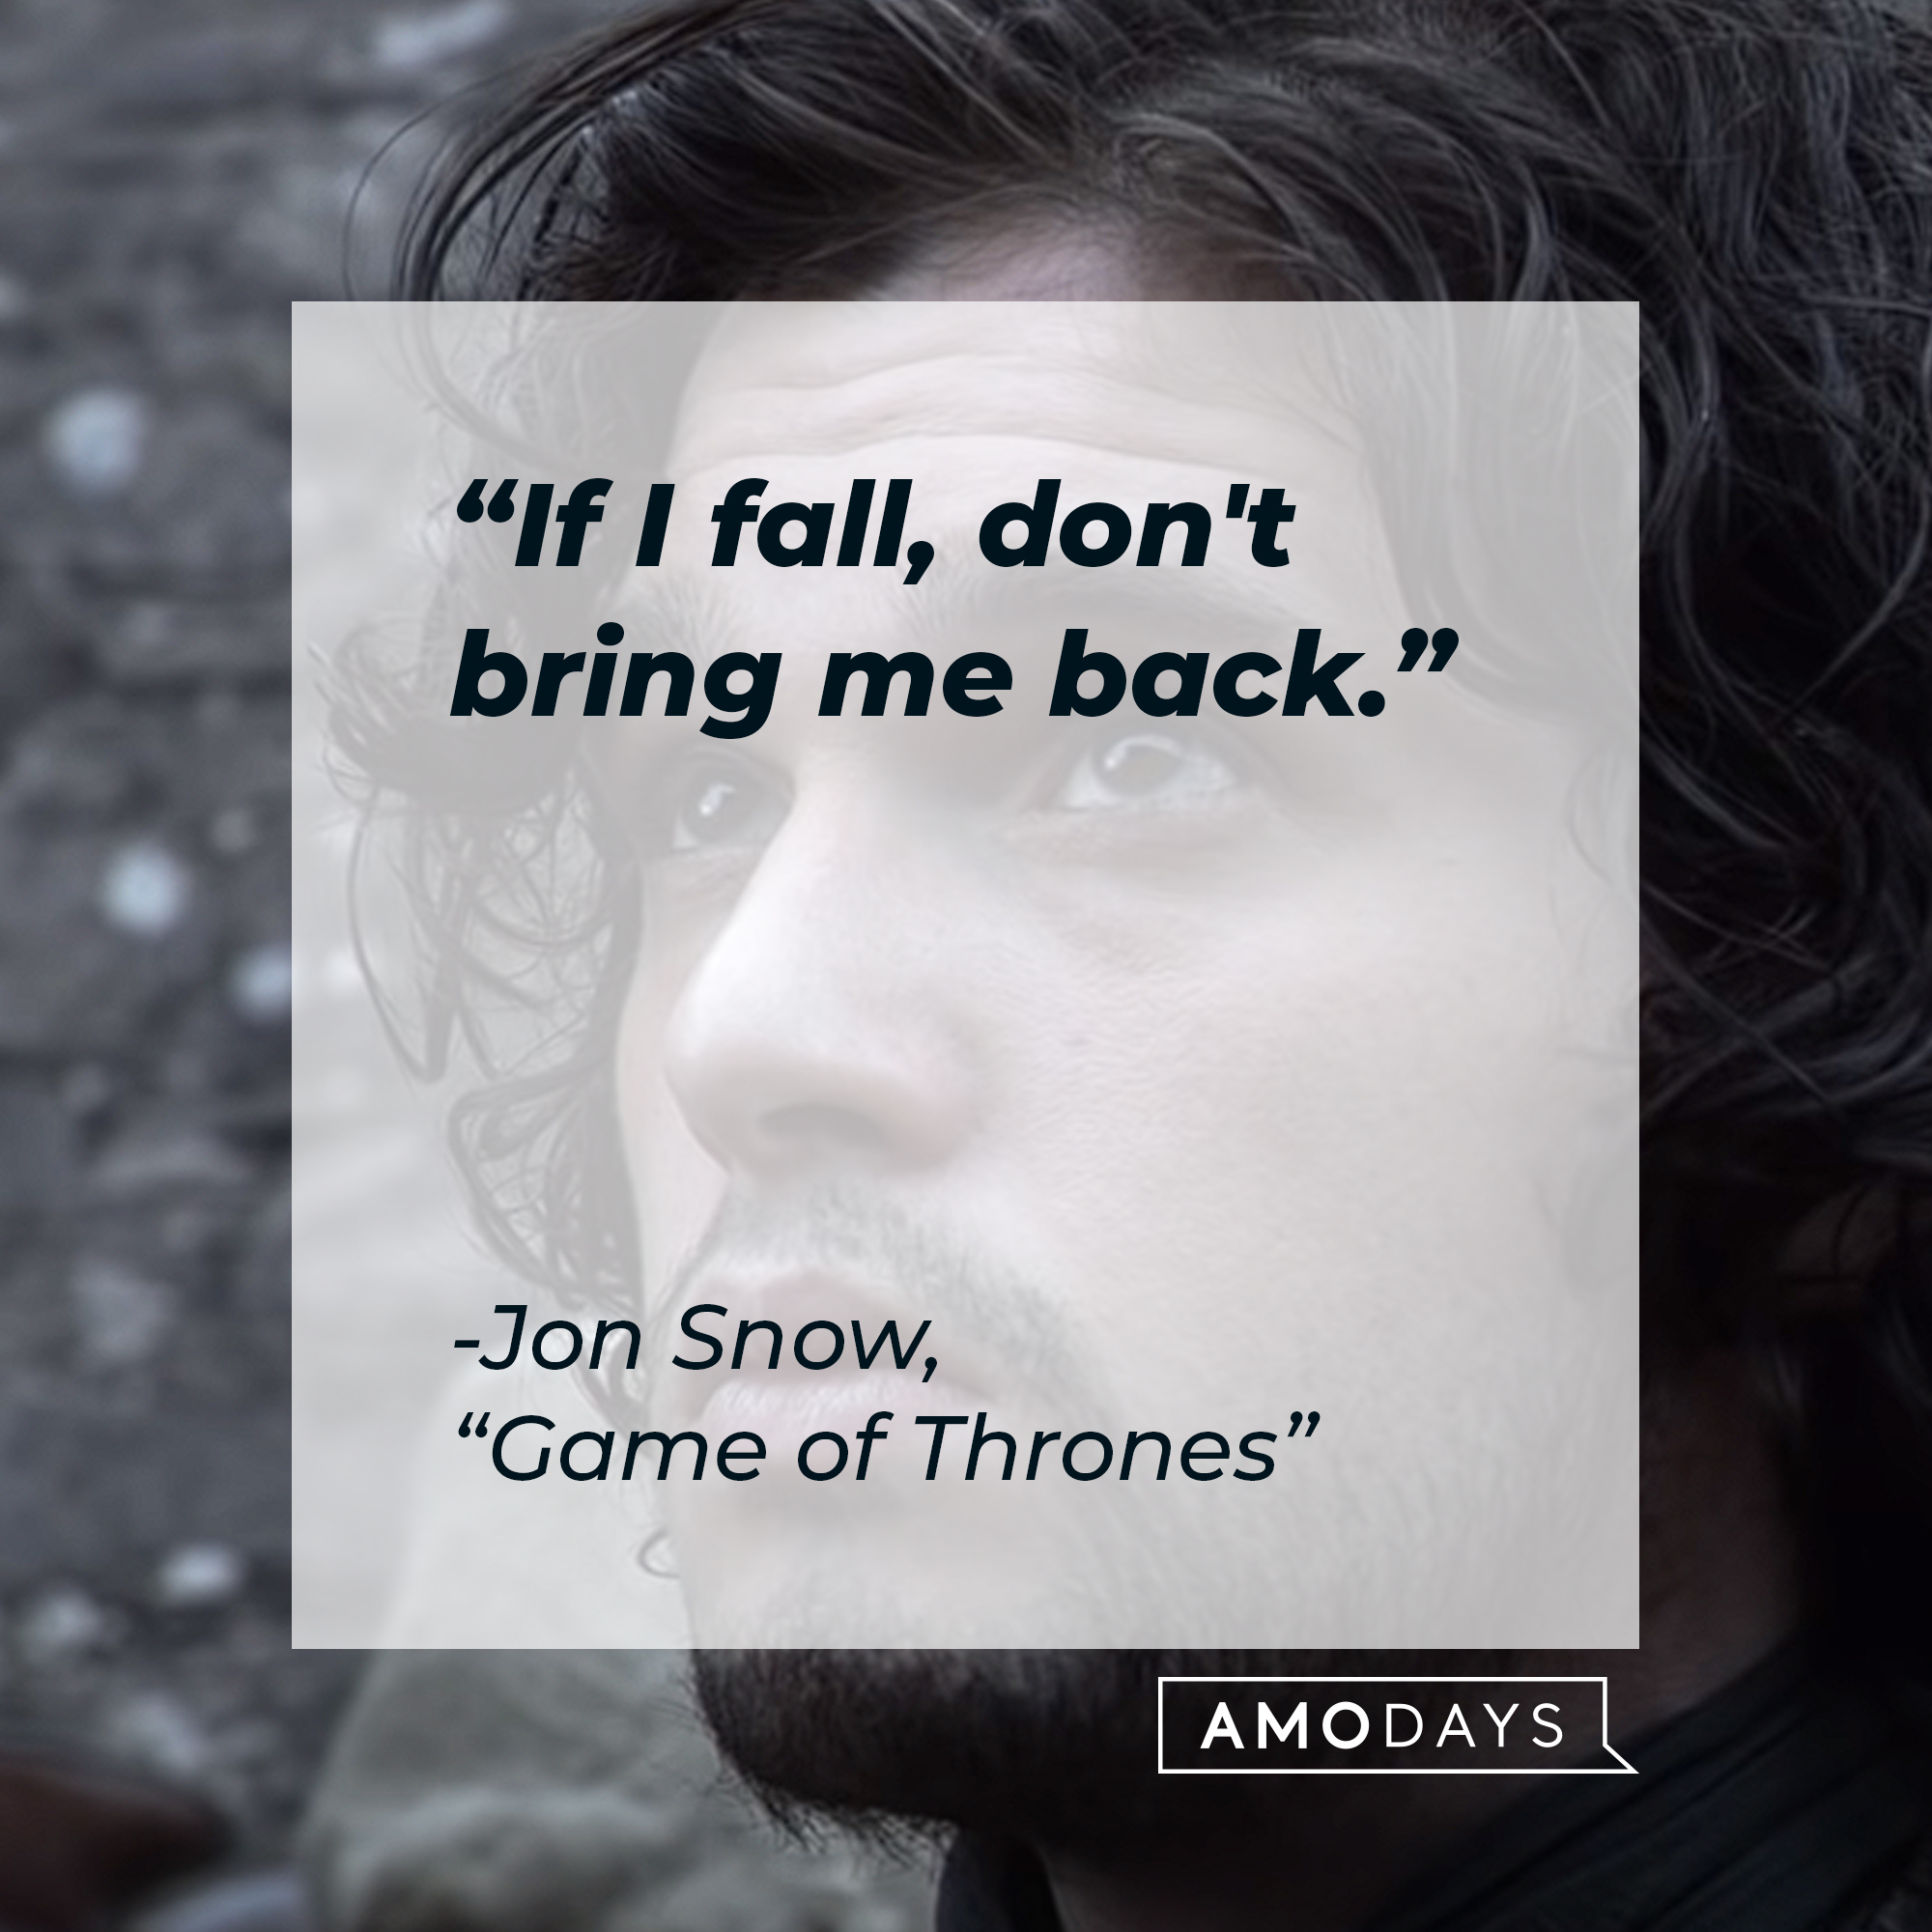 A photo of Jon Snow with the quote, "If I fall, don't bring me back." | Source: YouTube/gameofthrones